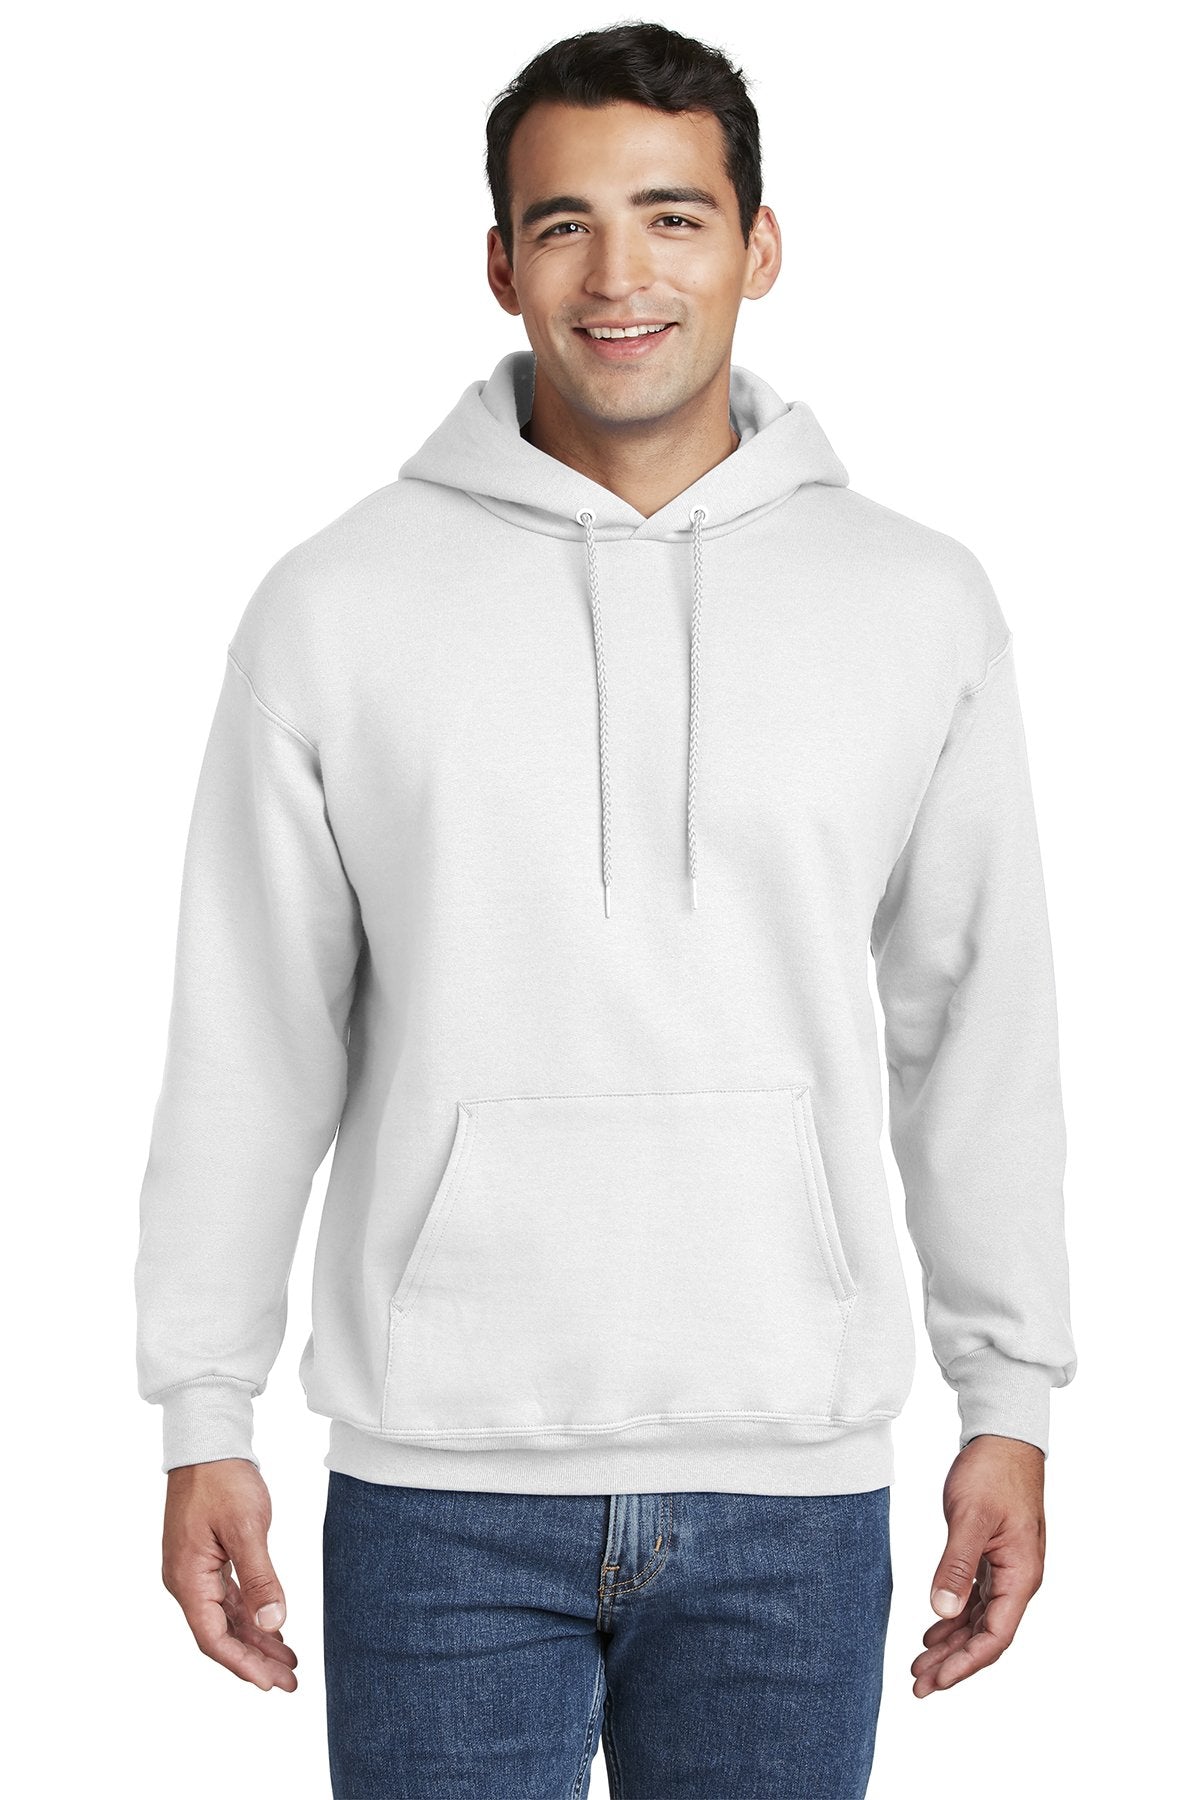 Hanes Ultimate Cotton Pullover Hooded Sweatshirt in White, with a ...